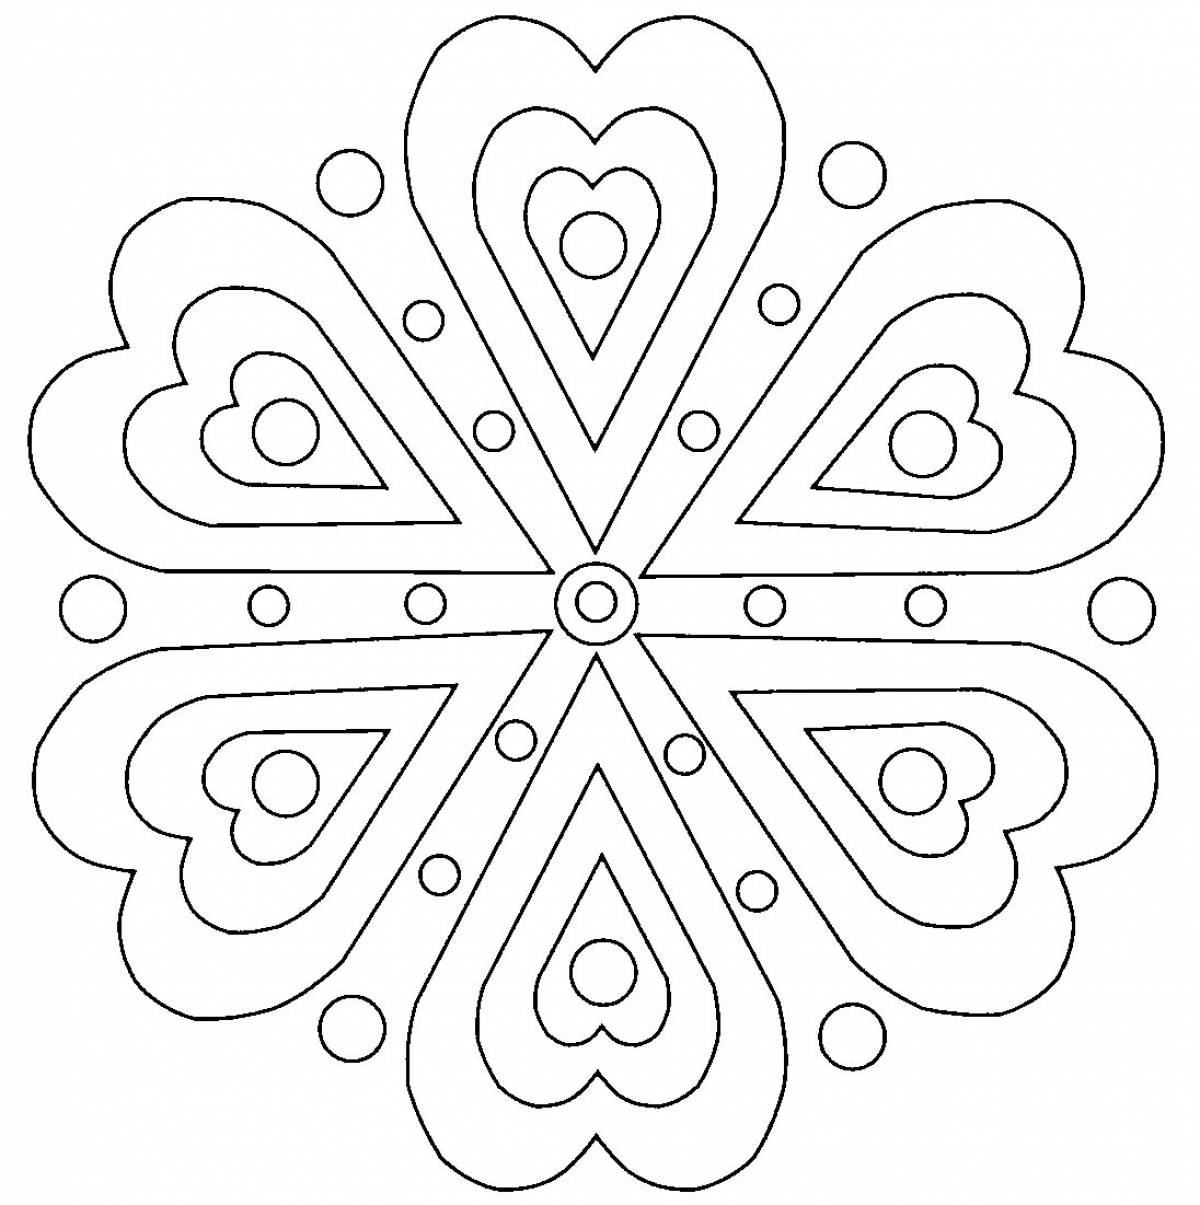 Bright abstract patterns coloring pages